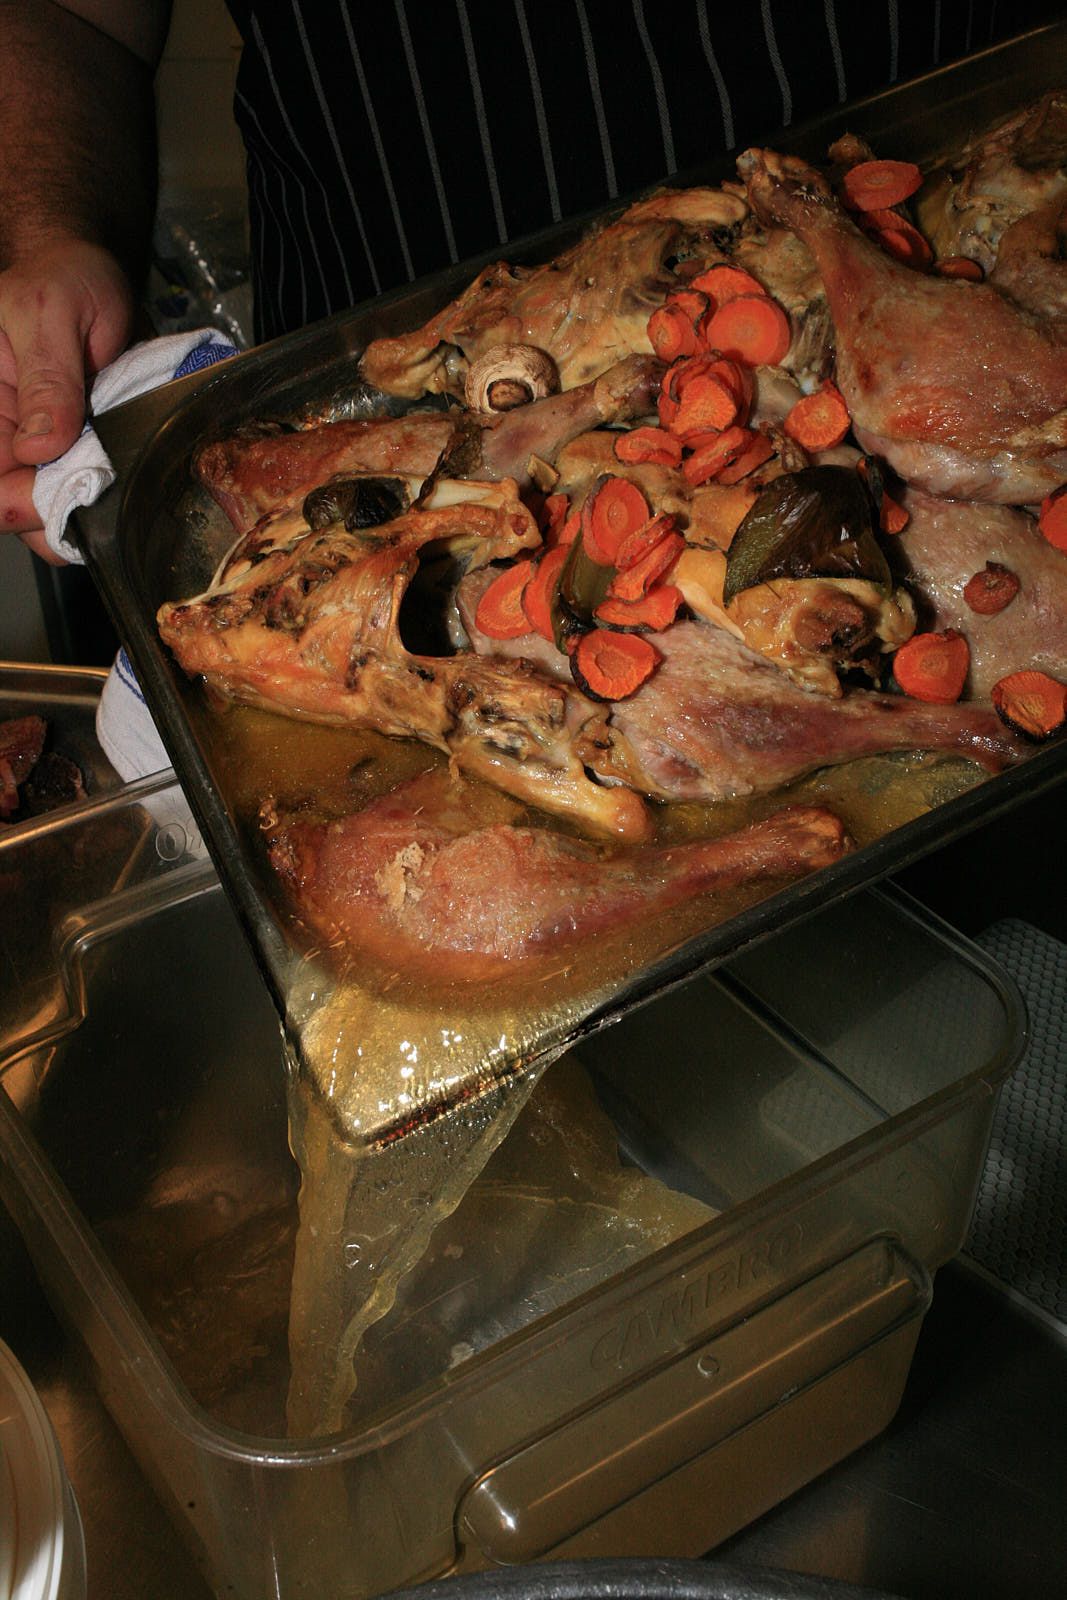 Duck fat is poured out of the metal gastro that housed the roasted duck legs and vegetables, into a clear stock jug.